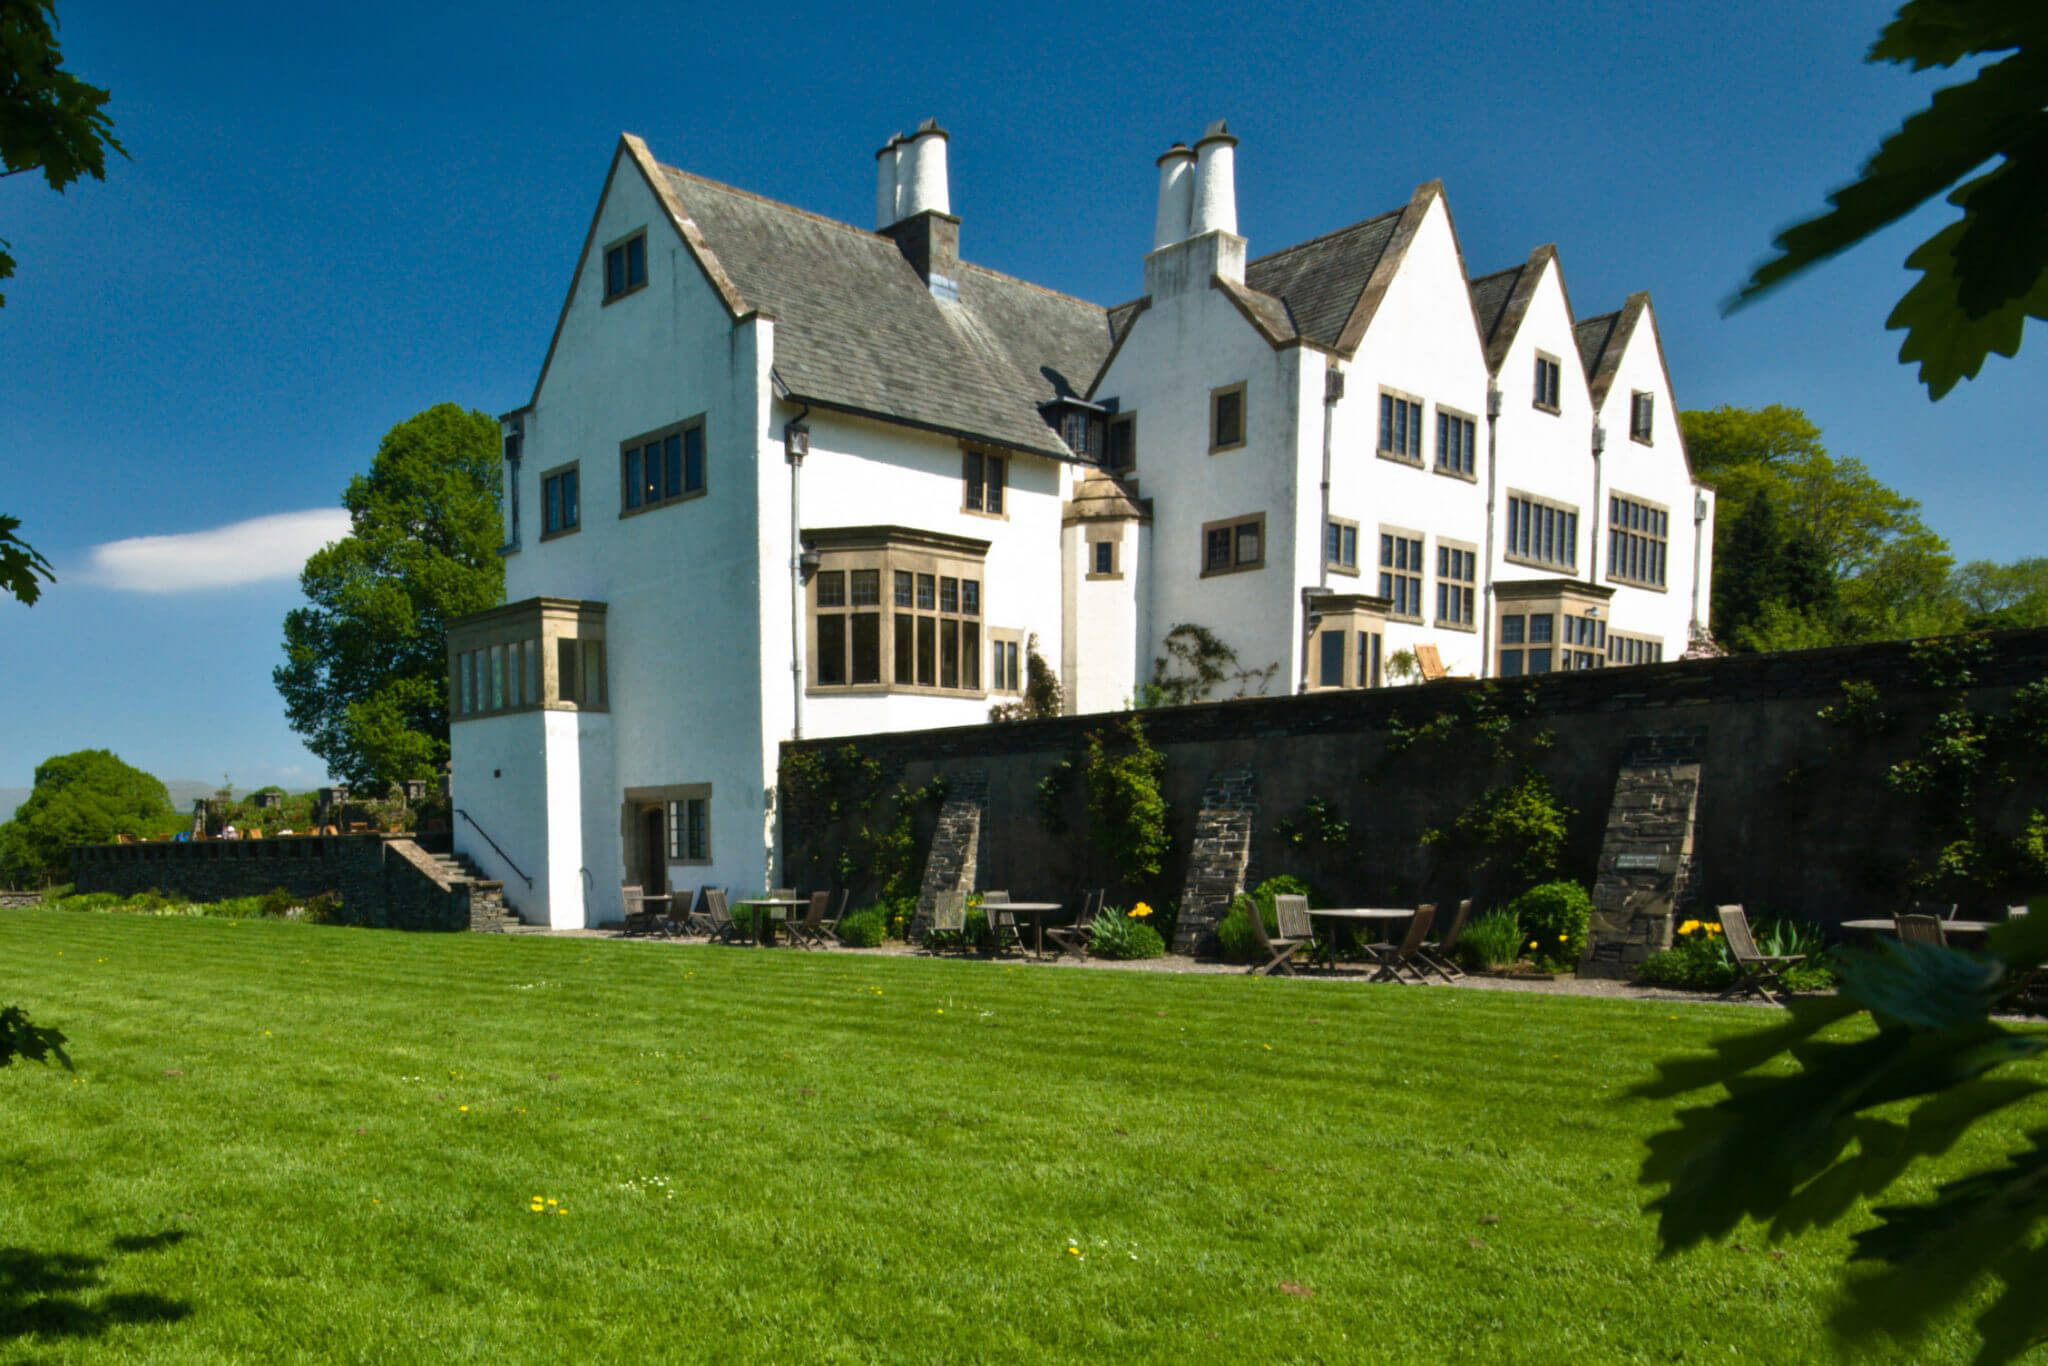 Just outside Bowness-on-Windermere is Blackwell House, one of the UK's finest examples of Arts and Crafts architecture.